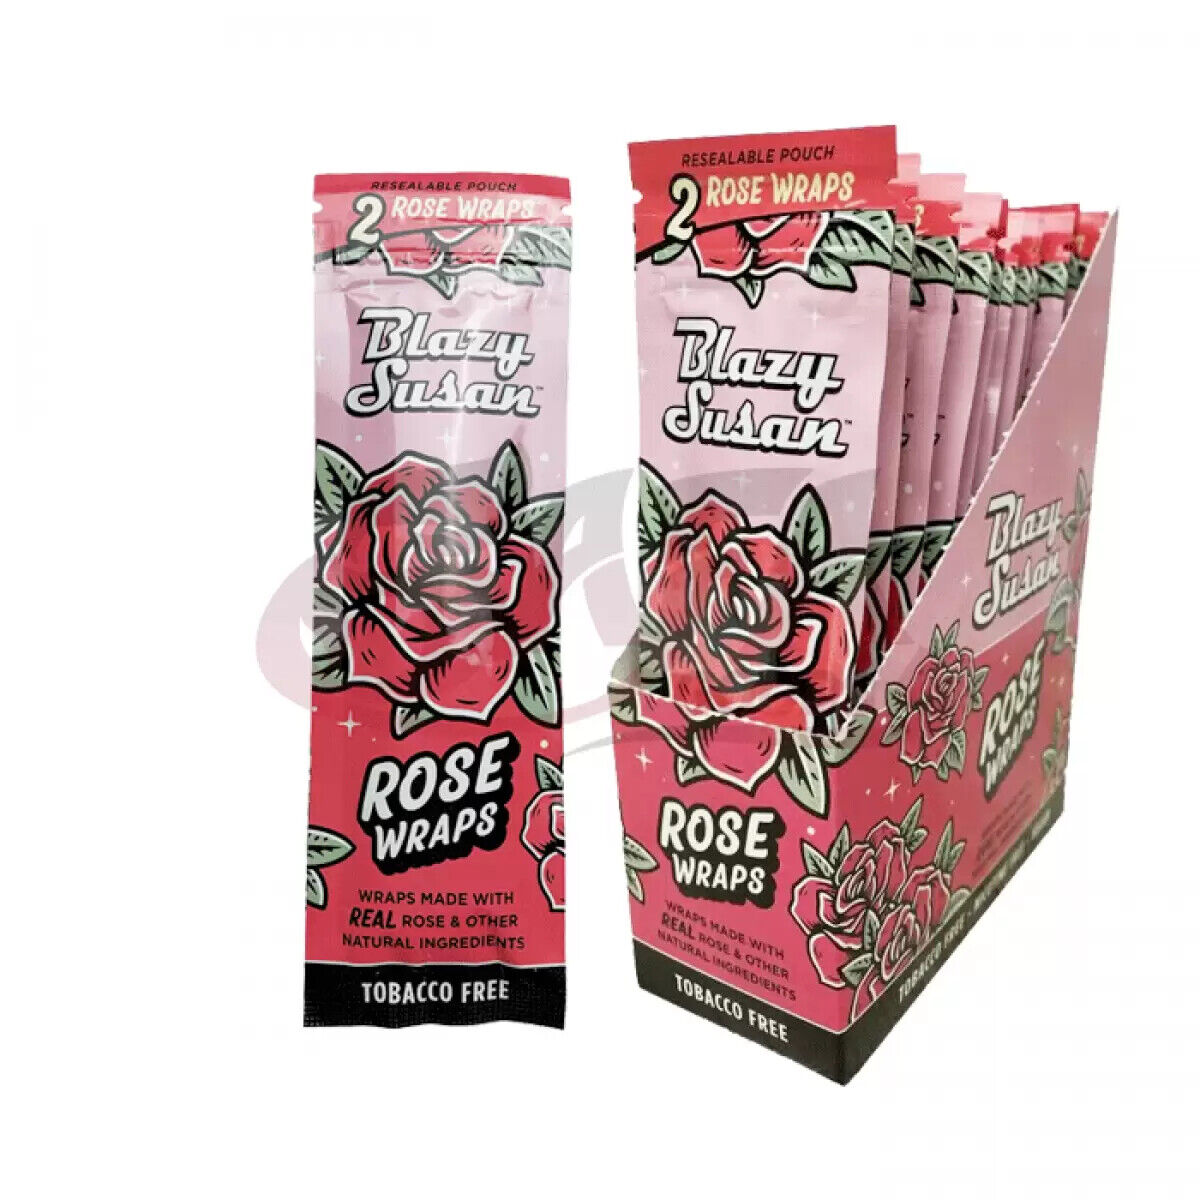 Authentic Blazy Susan Rose Pre-Rolls Wraps  5 Packs Made with Real Rose